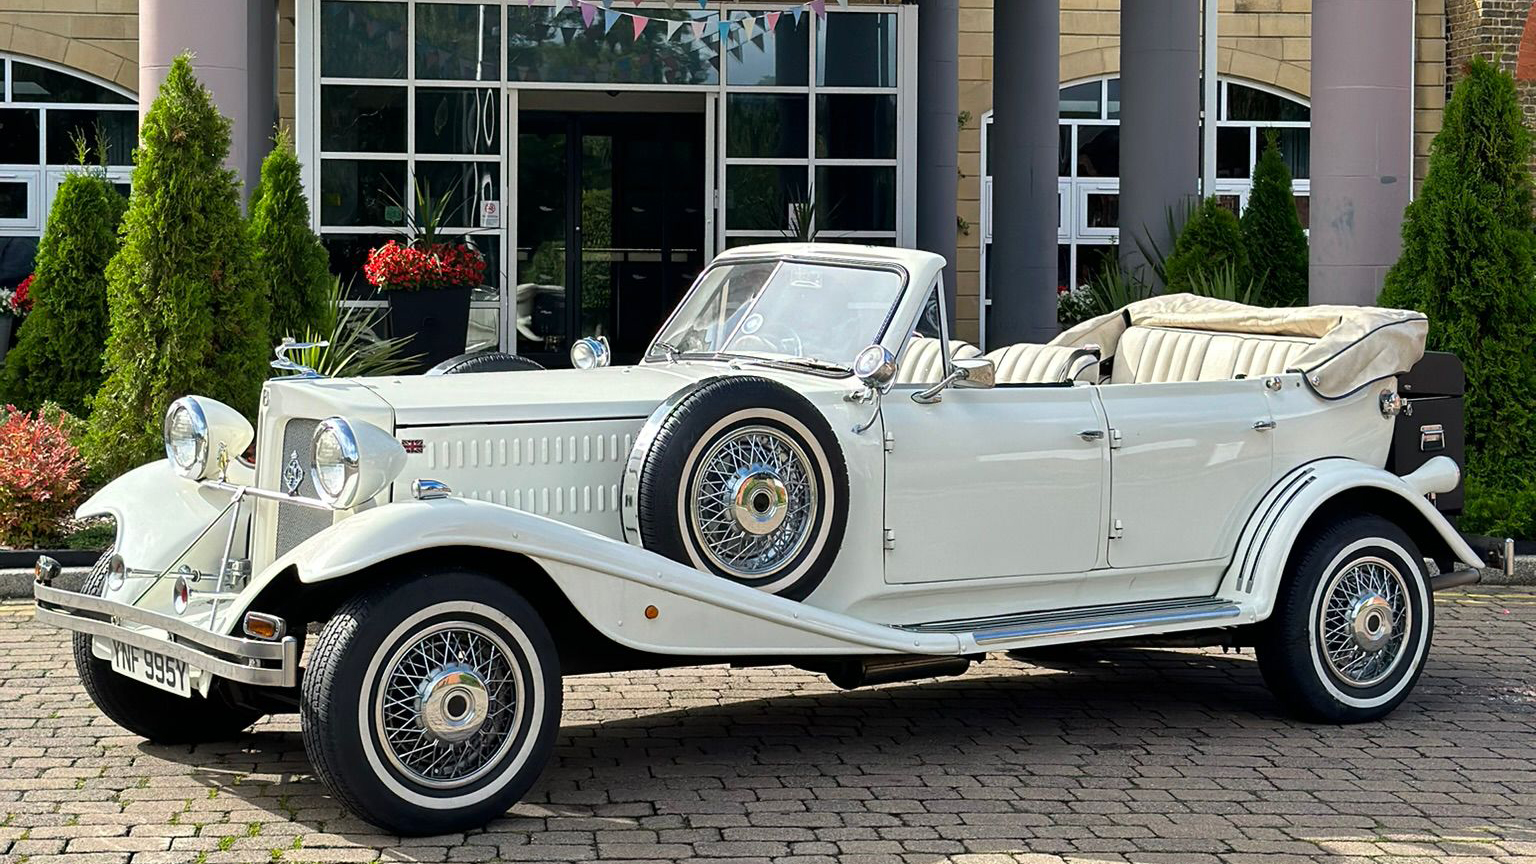 Left side view of Convertible Beauford